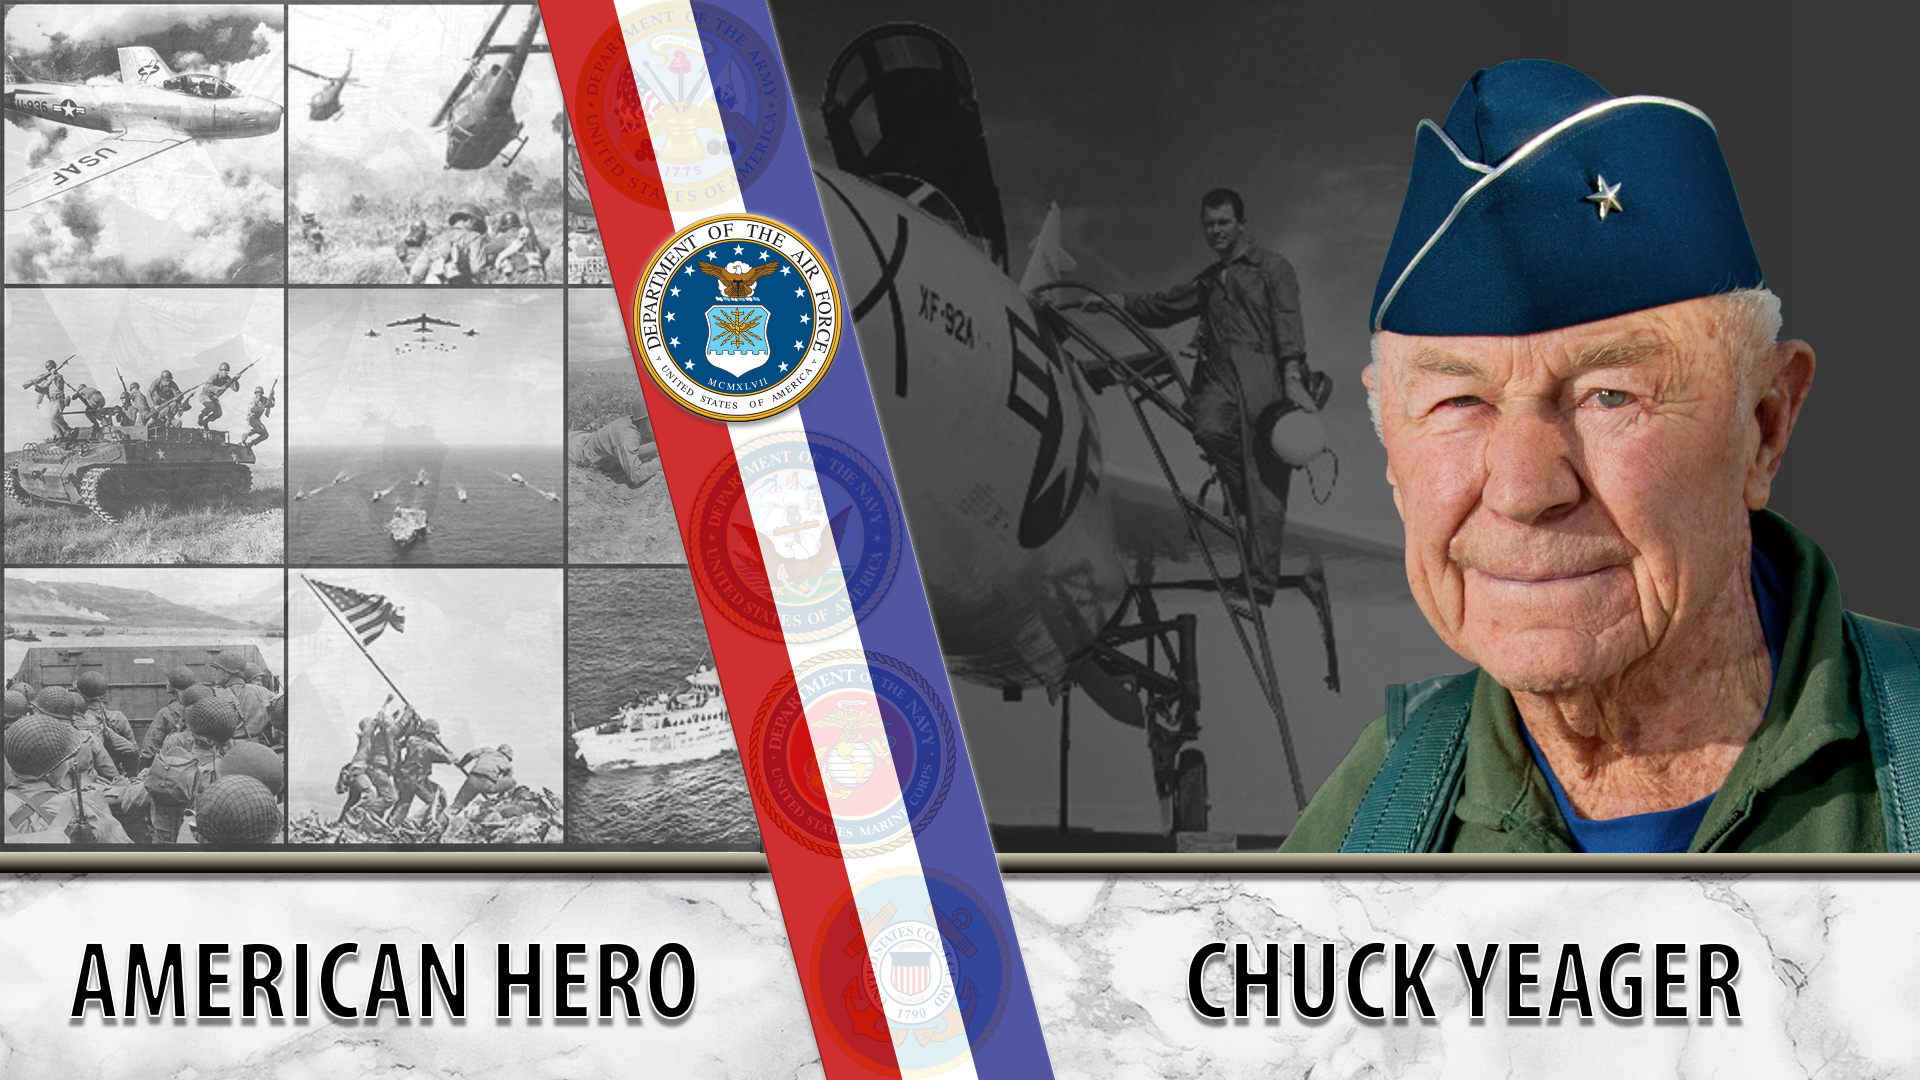 Chuck Yeager is an Air Force Veteran and the first person to break the sound barrier.